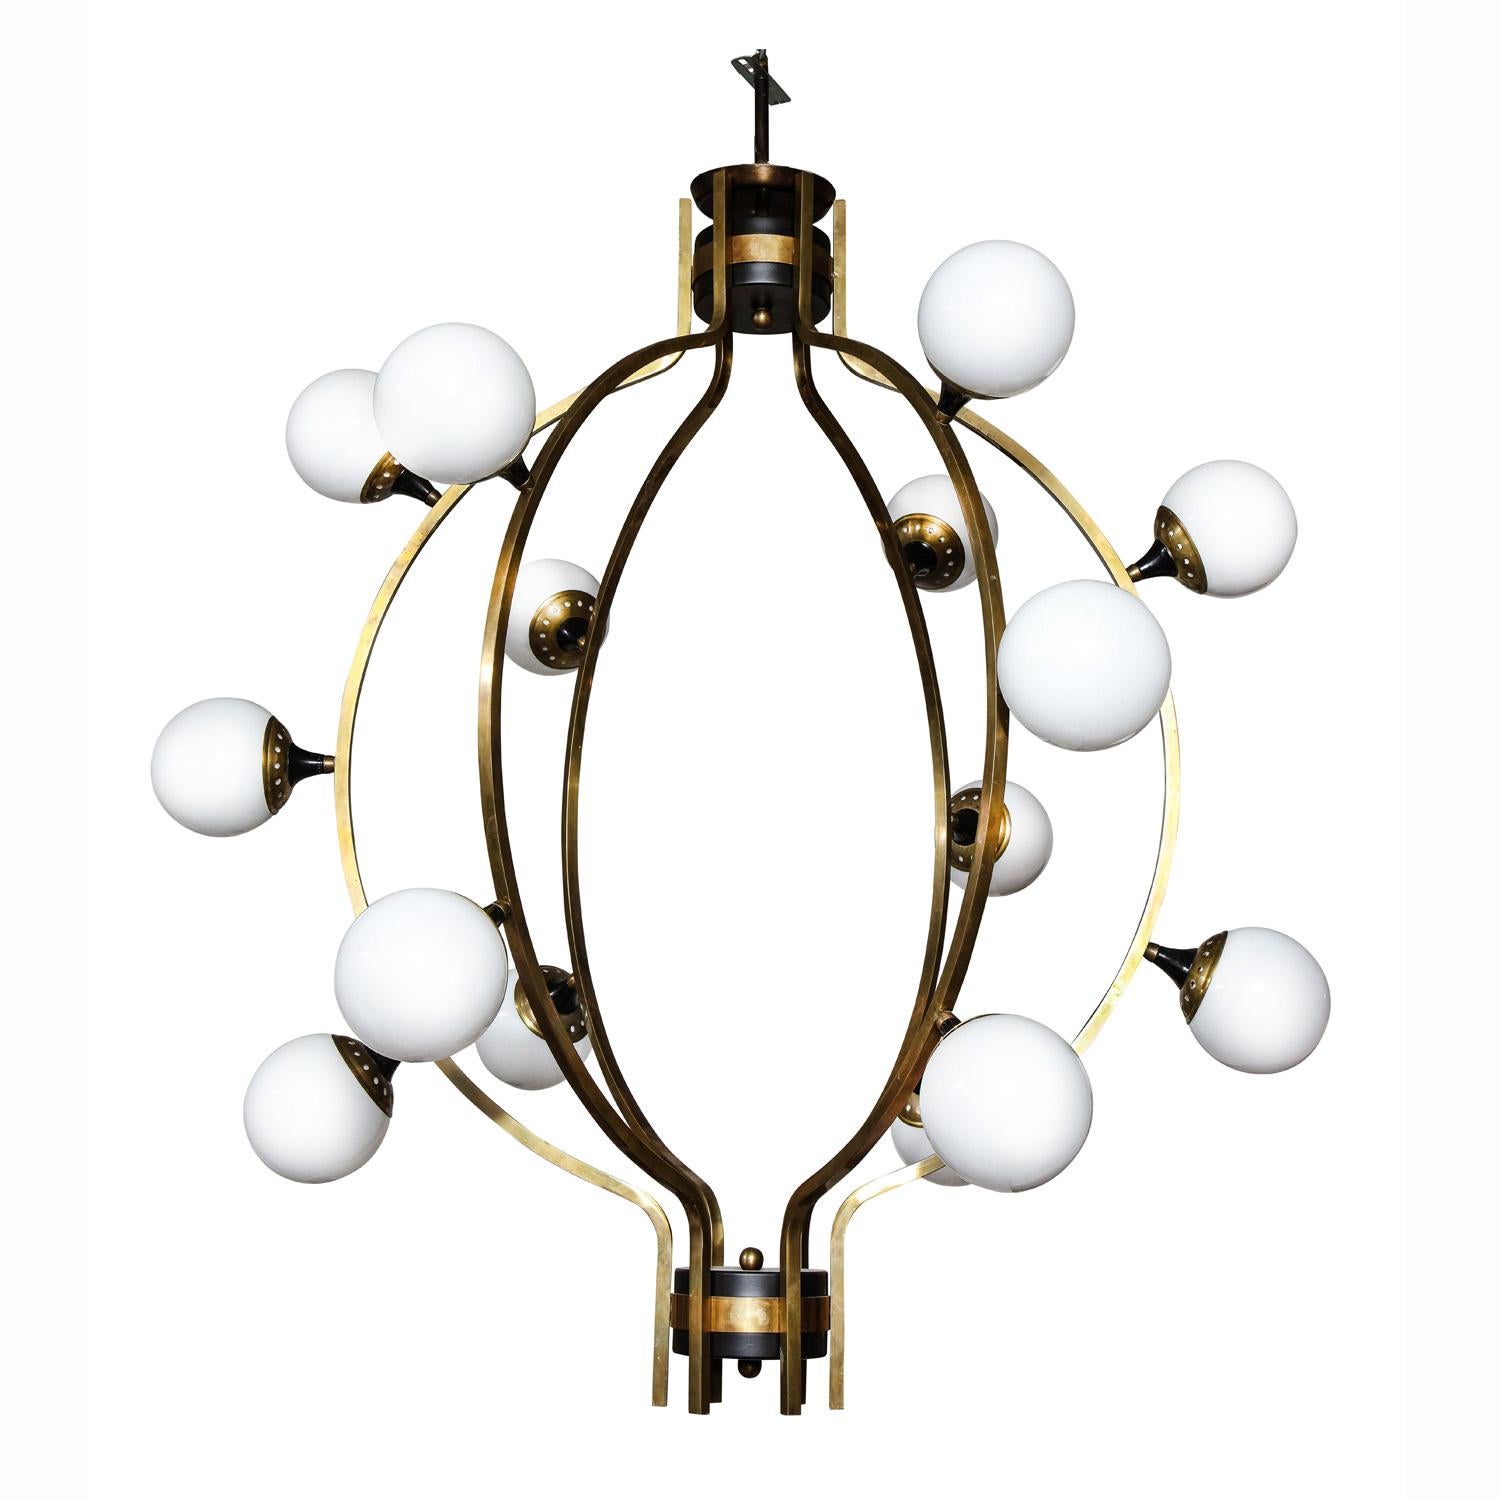 Large and impressive black lacquered steel and brass spherical chandelier with opaline glass globes by Stilnovo. Italy, 1970.